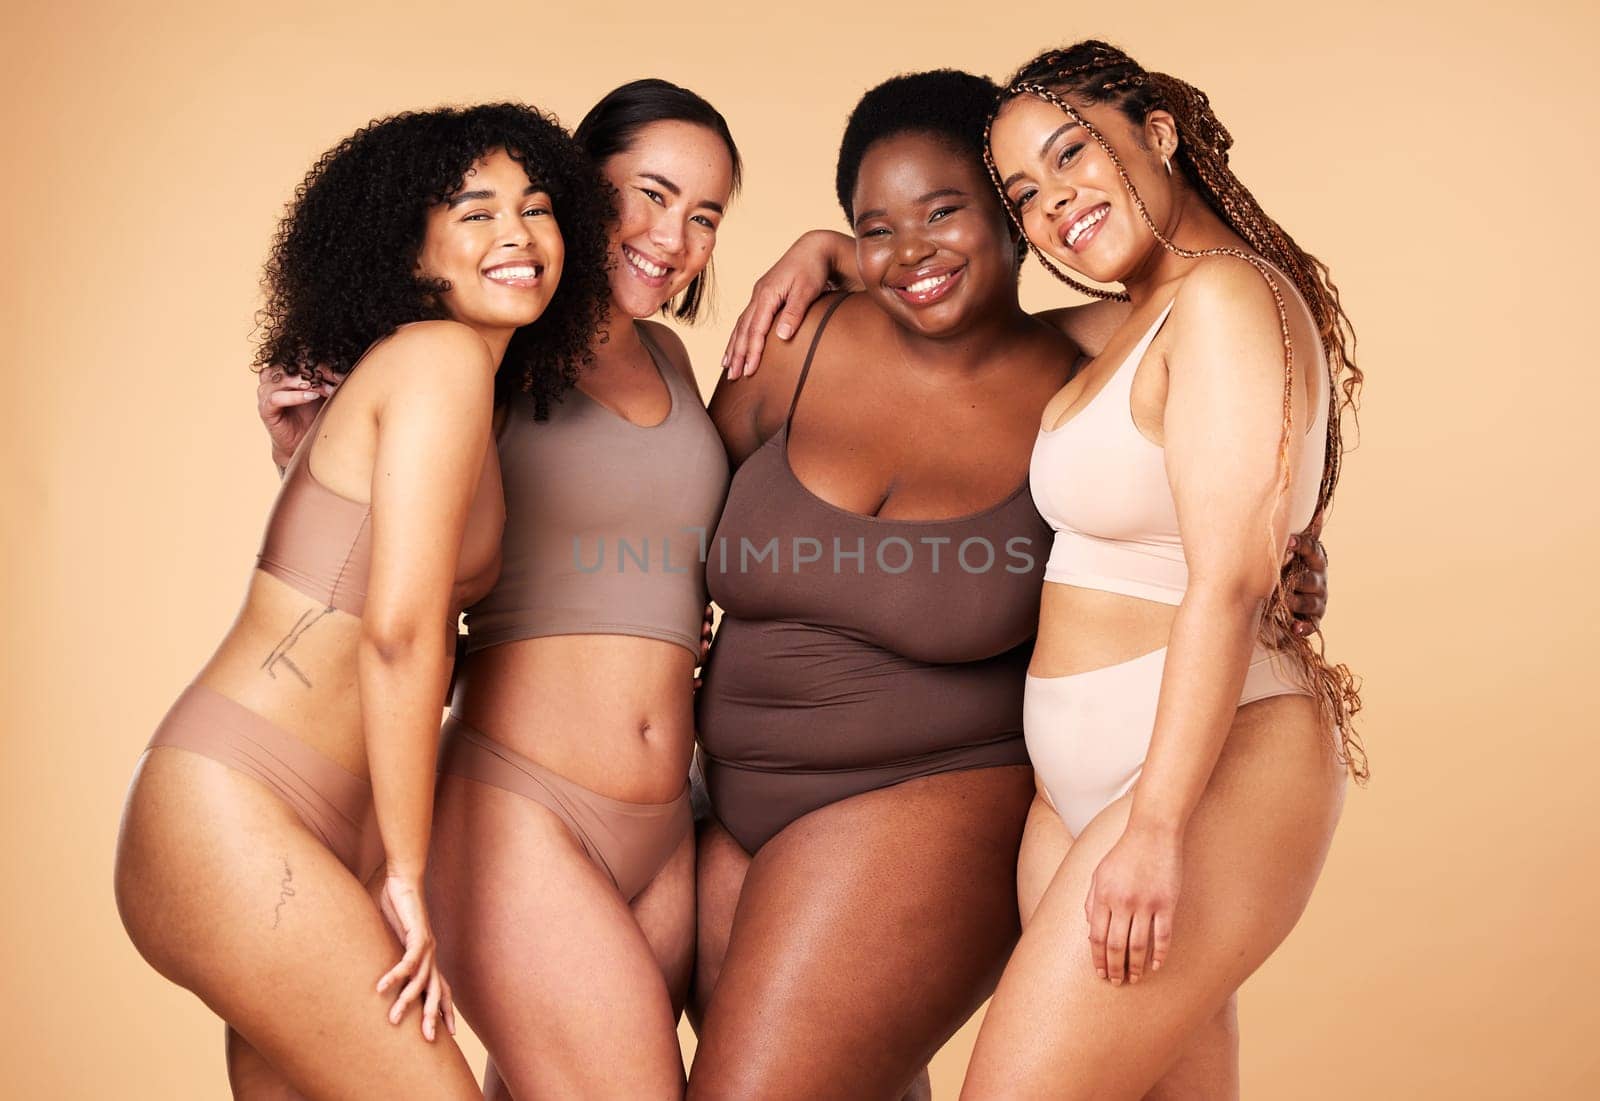 Diversity, body positive and portrait of women group together for inclusion, beauty and power. Aesthetic model people or friends on beige background with skin glow, pride and motivation for self love.